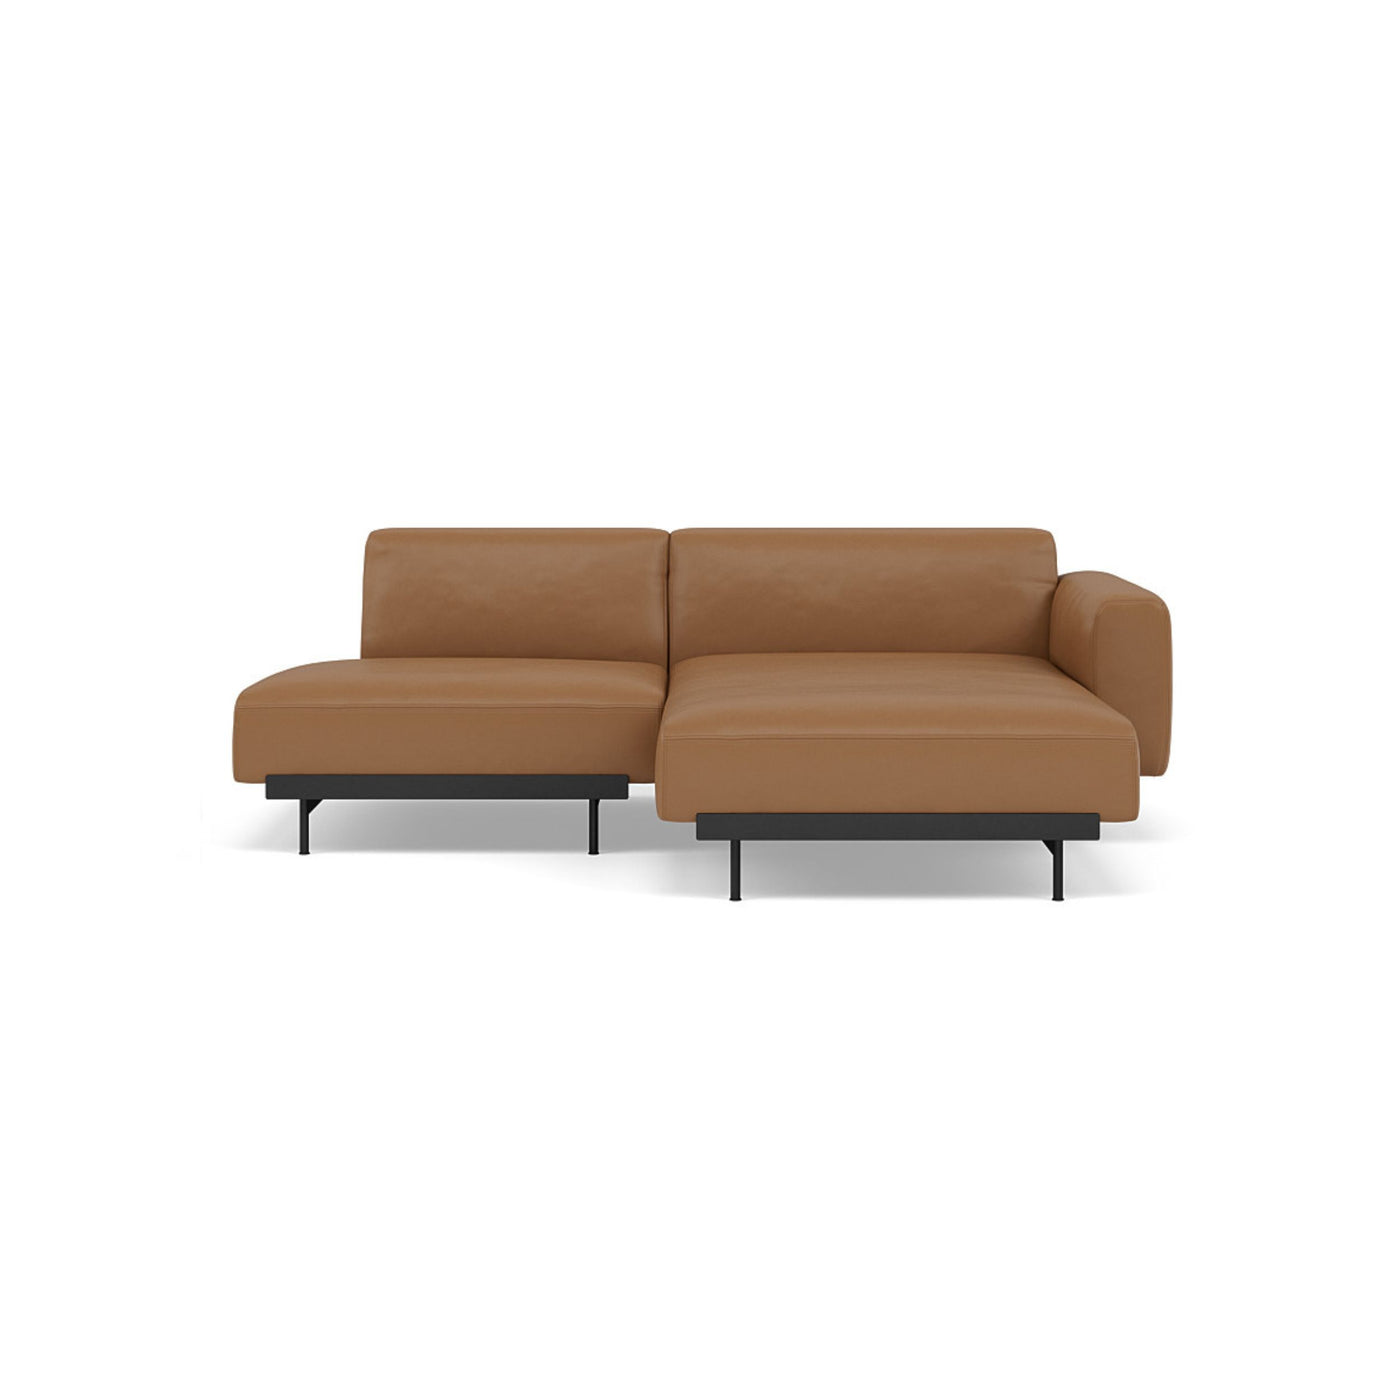 Muuto In Situ 2 Seater sofa in configuration 7. Made to order from someday designs. #colour_cognac-refine-leather